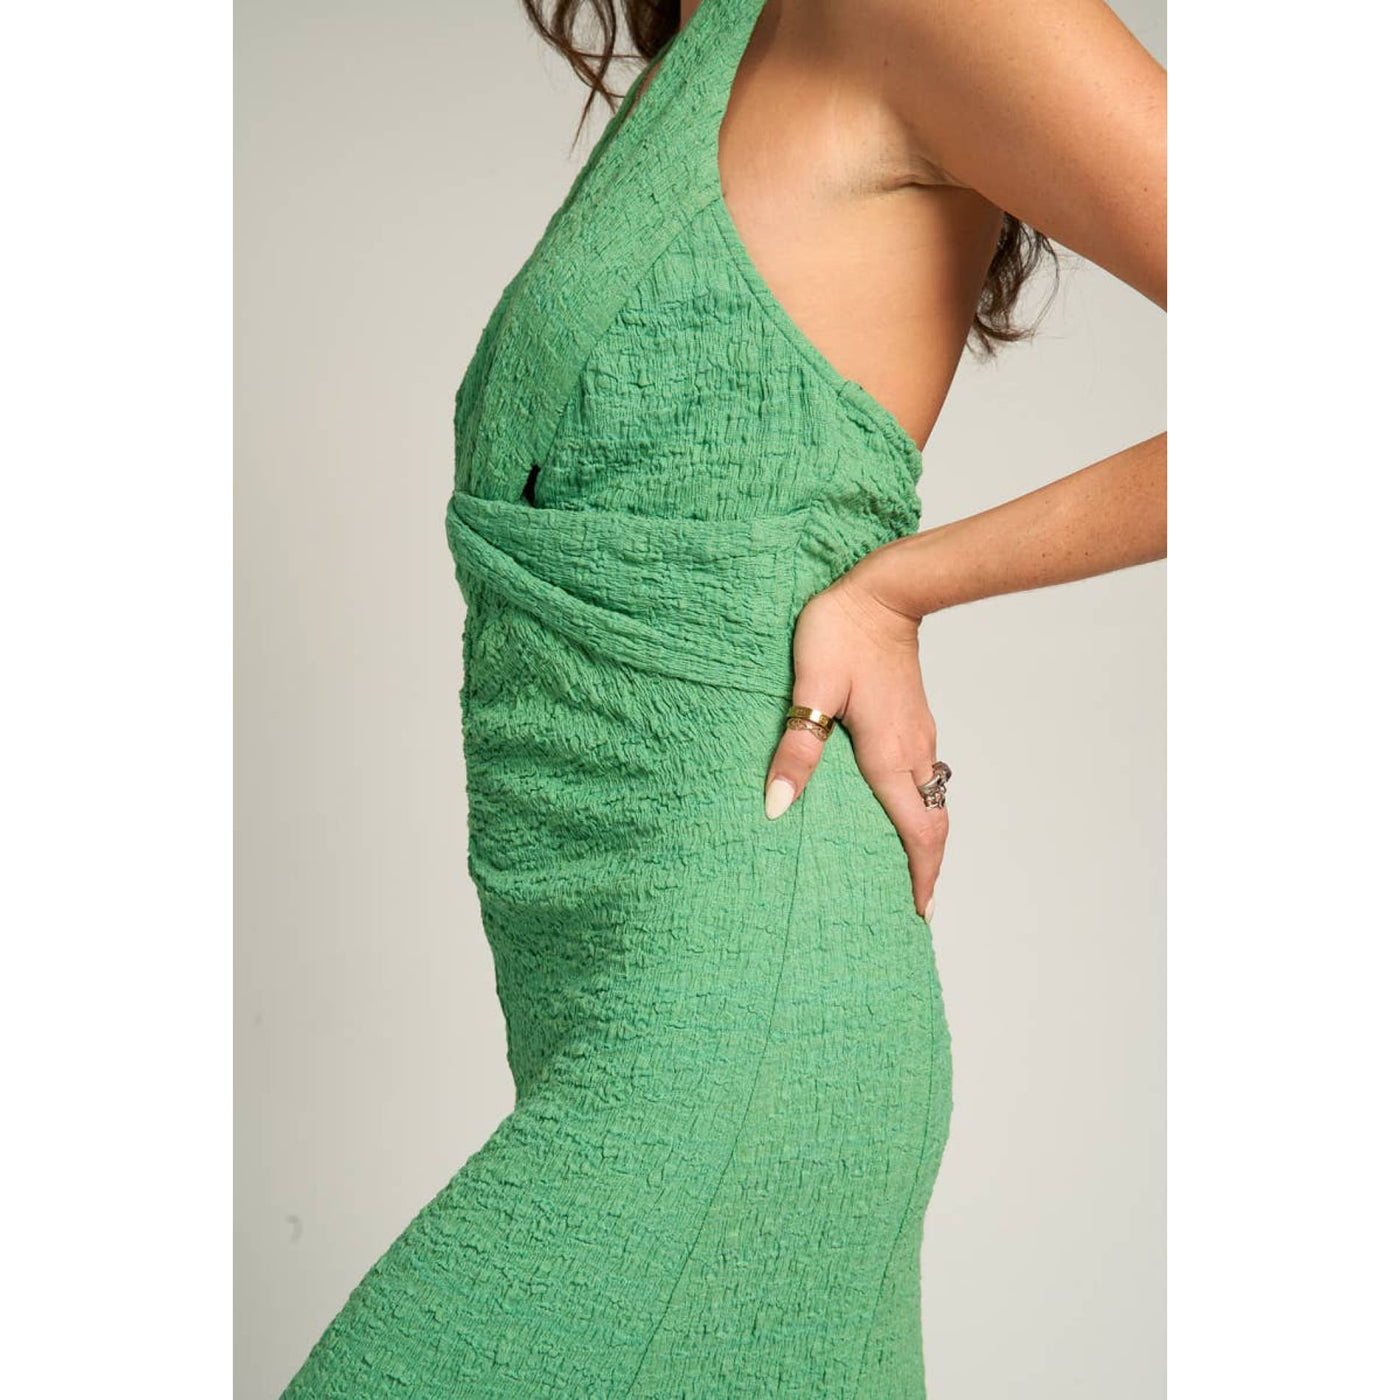 Green With Envy Maxi Dress - 175 Evening Dresses/Jumpsuits/Rompers